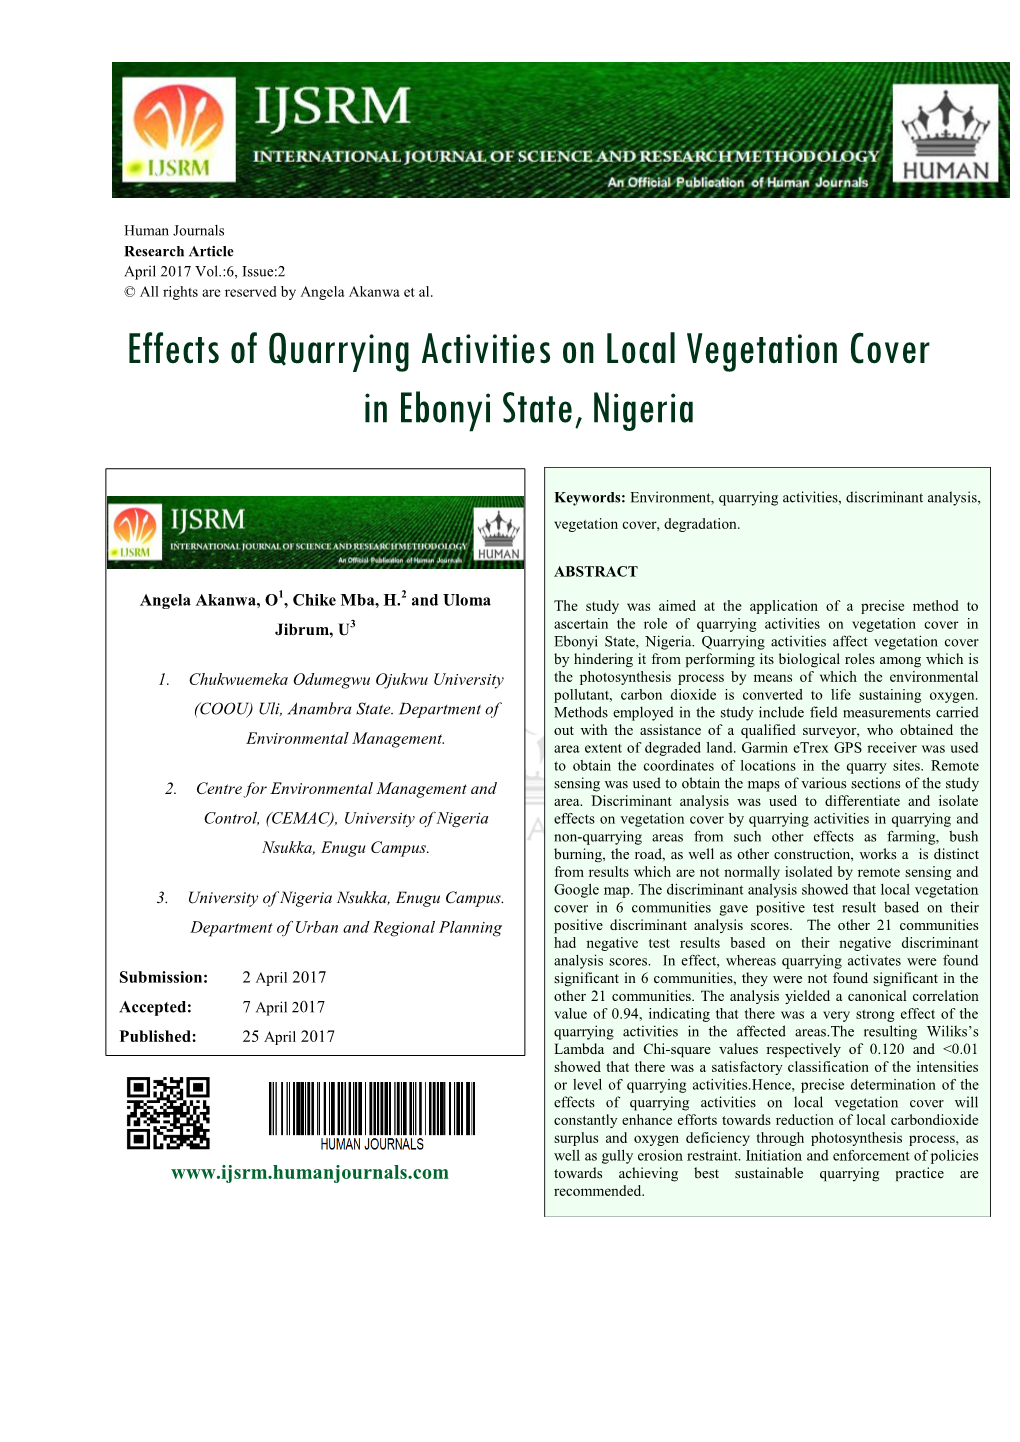 Effects of Quarrying Activities on Local Vegetation Cover in Ebonyi State, Nigeria